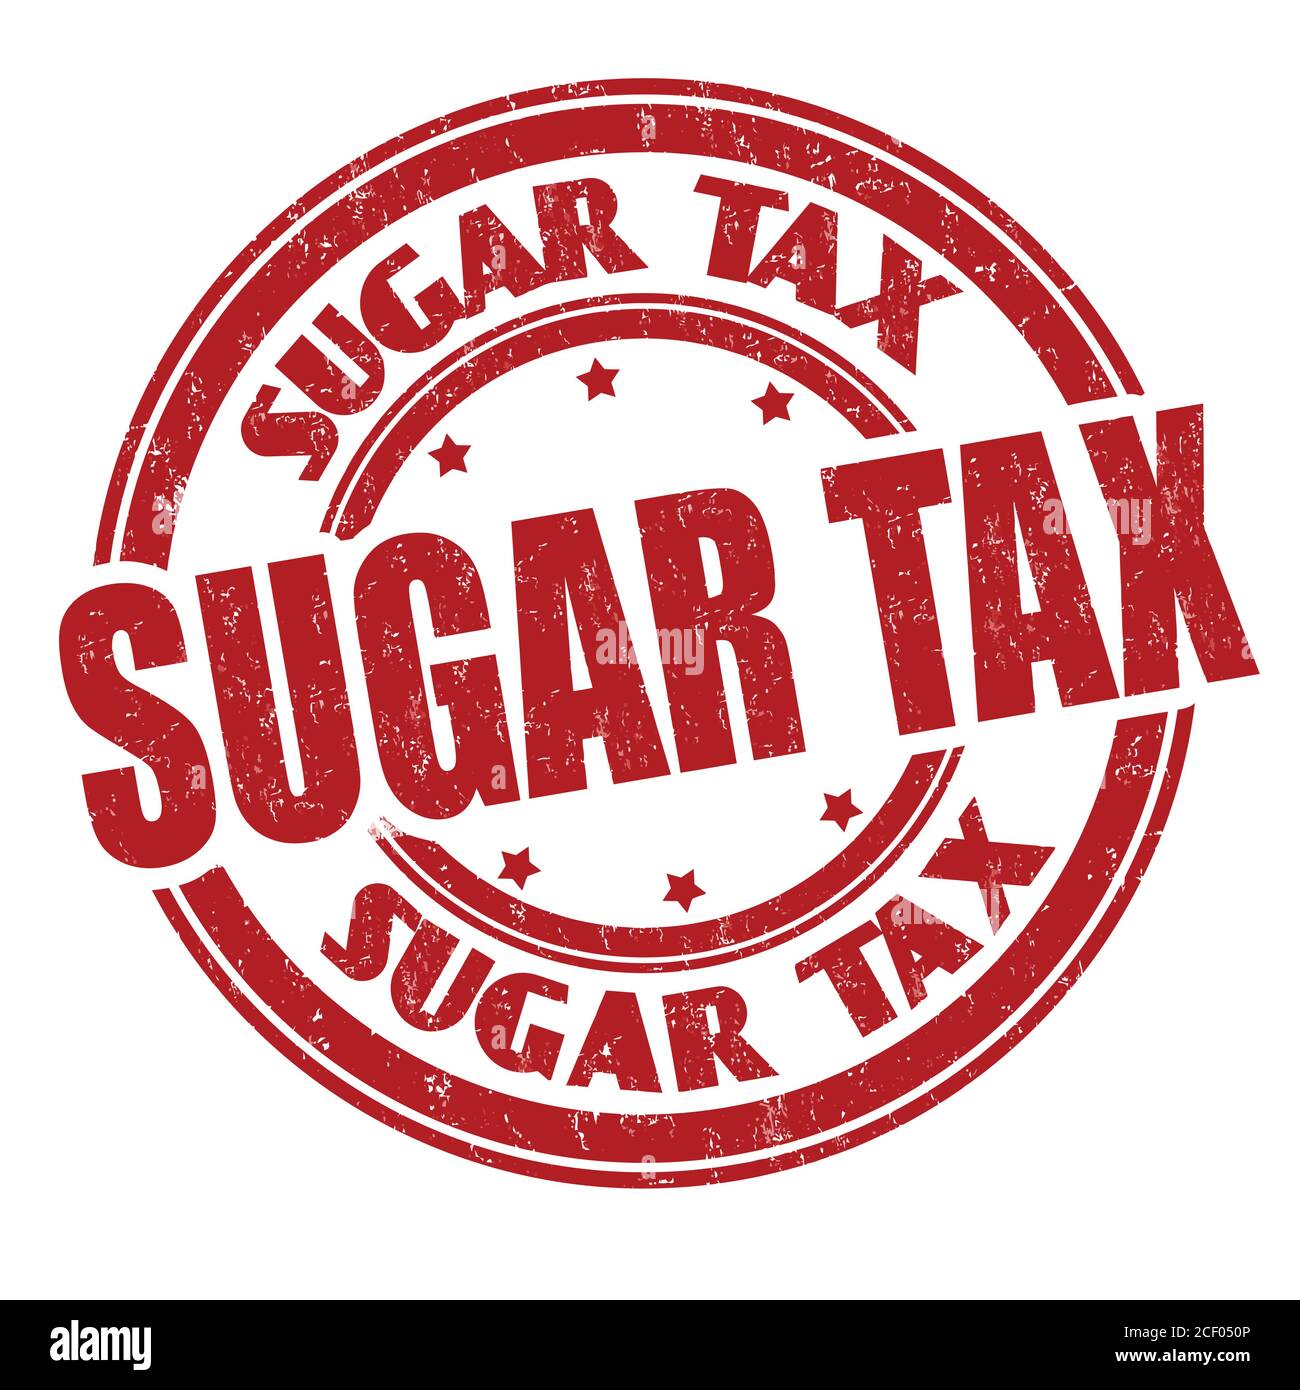 Sugar tax grunge rubber stamp on white background, vector illustration Stock Vector